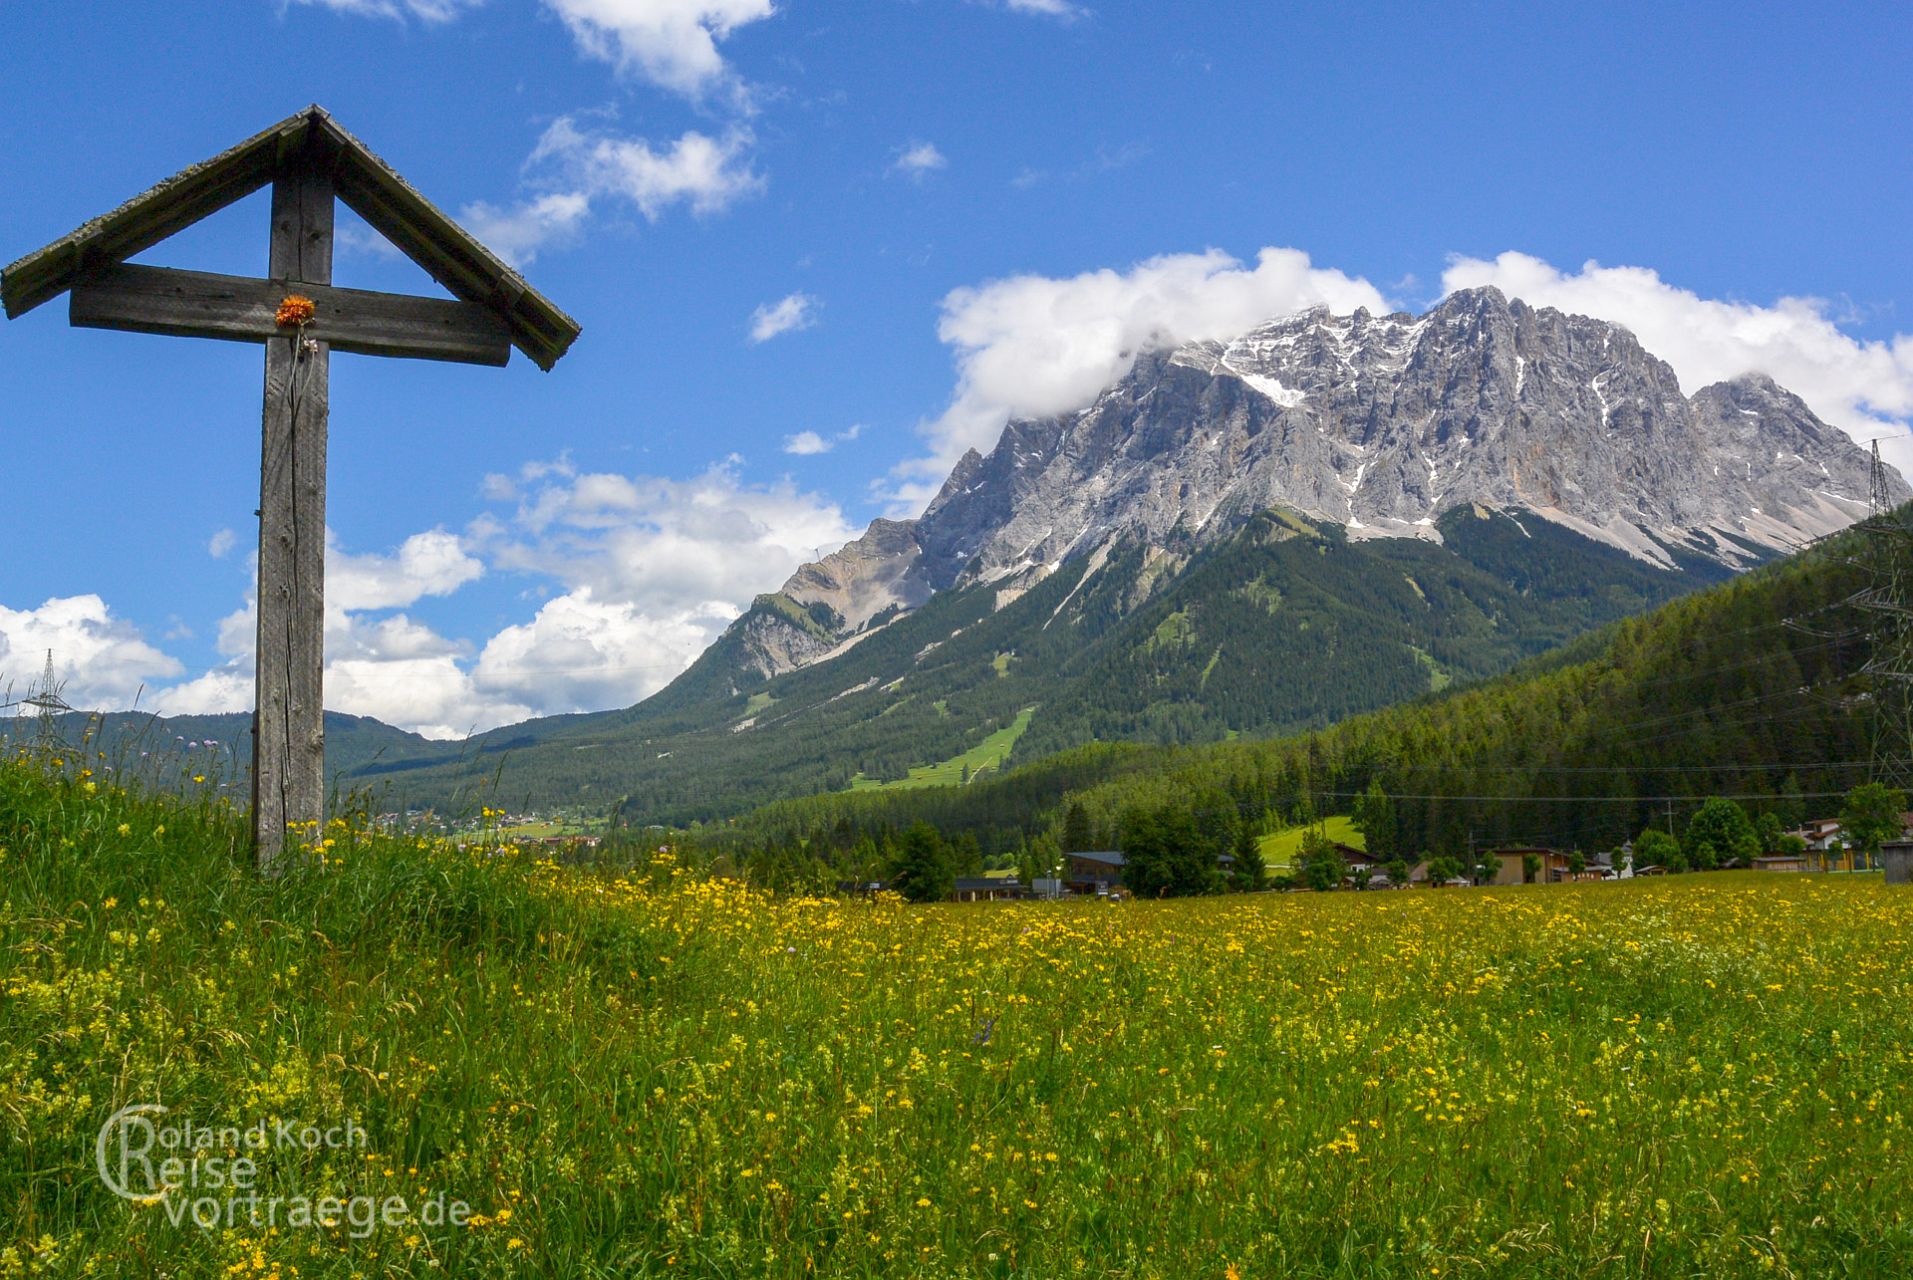 with children by bike over the Alps, Via Claudia Augusta, Ehrwald with a view of the Zugspitze